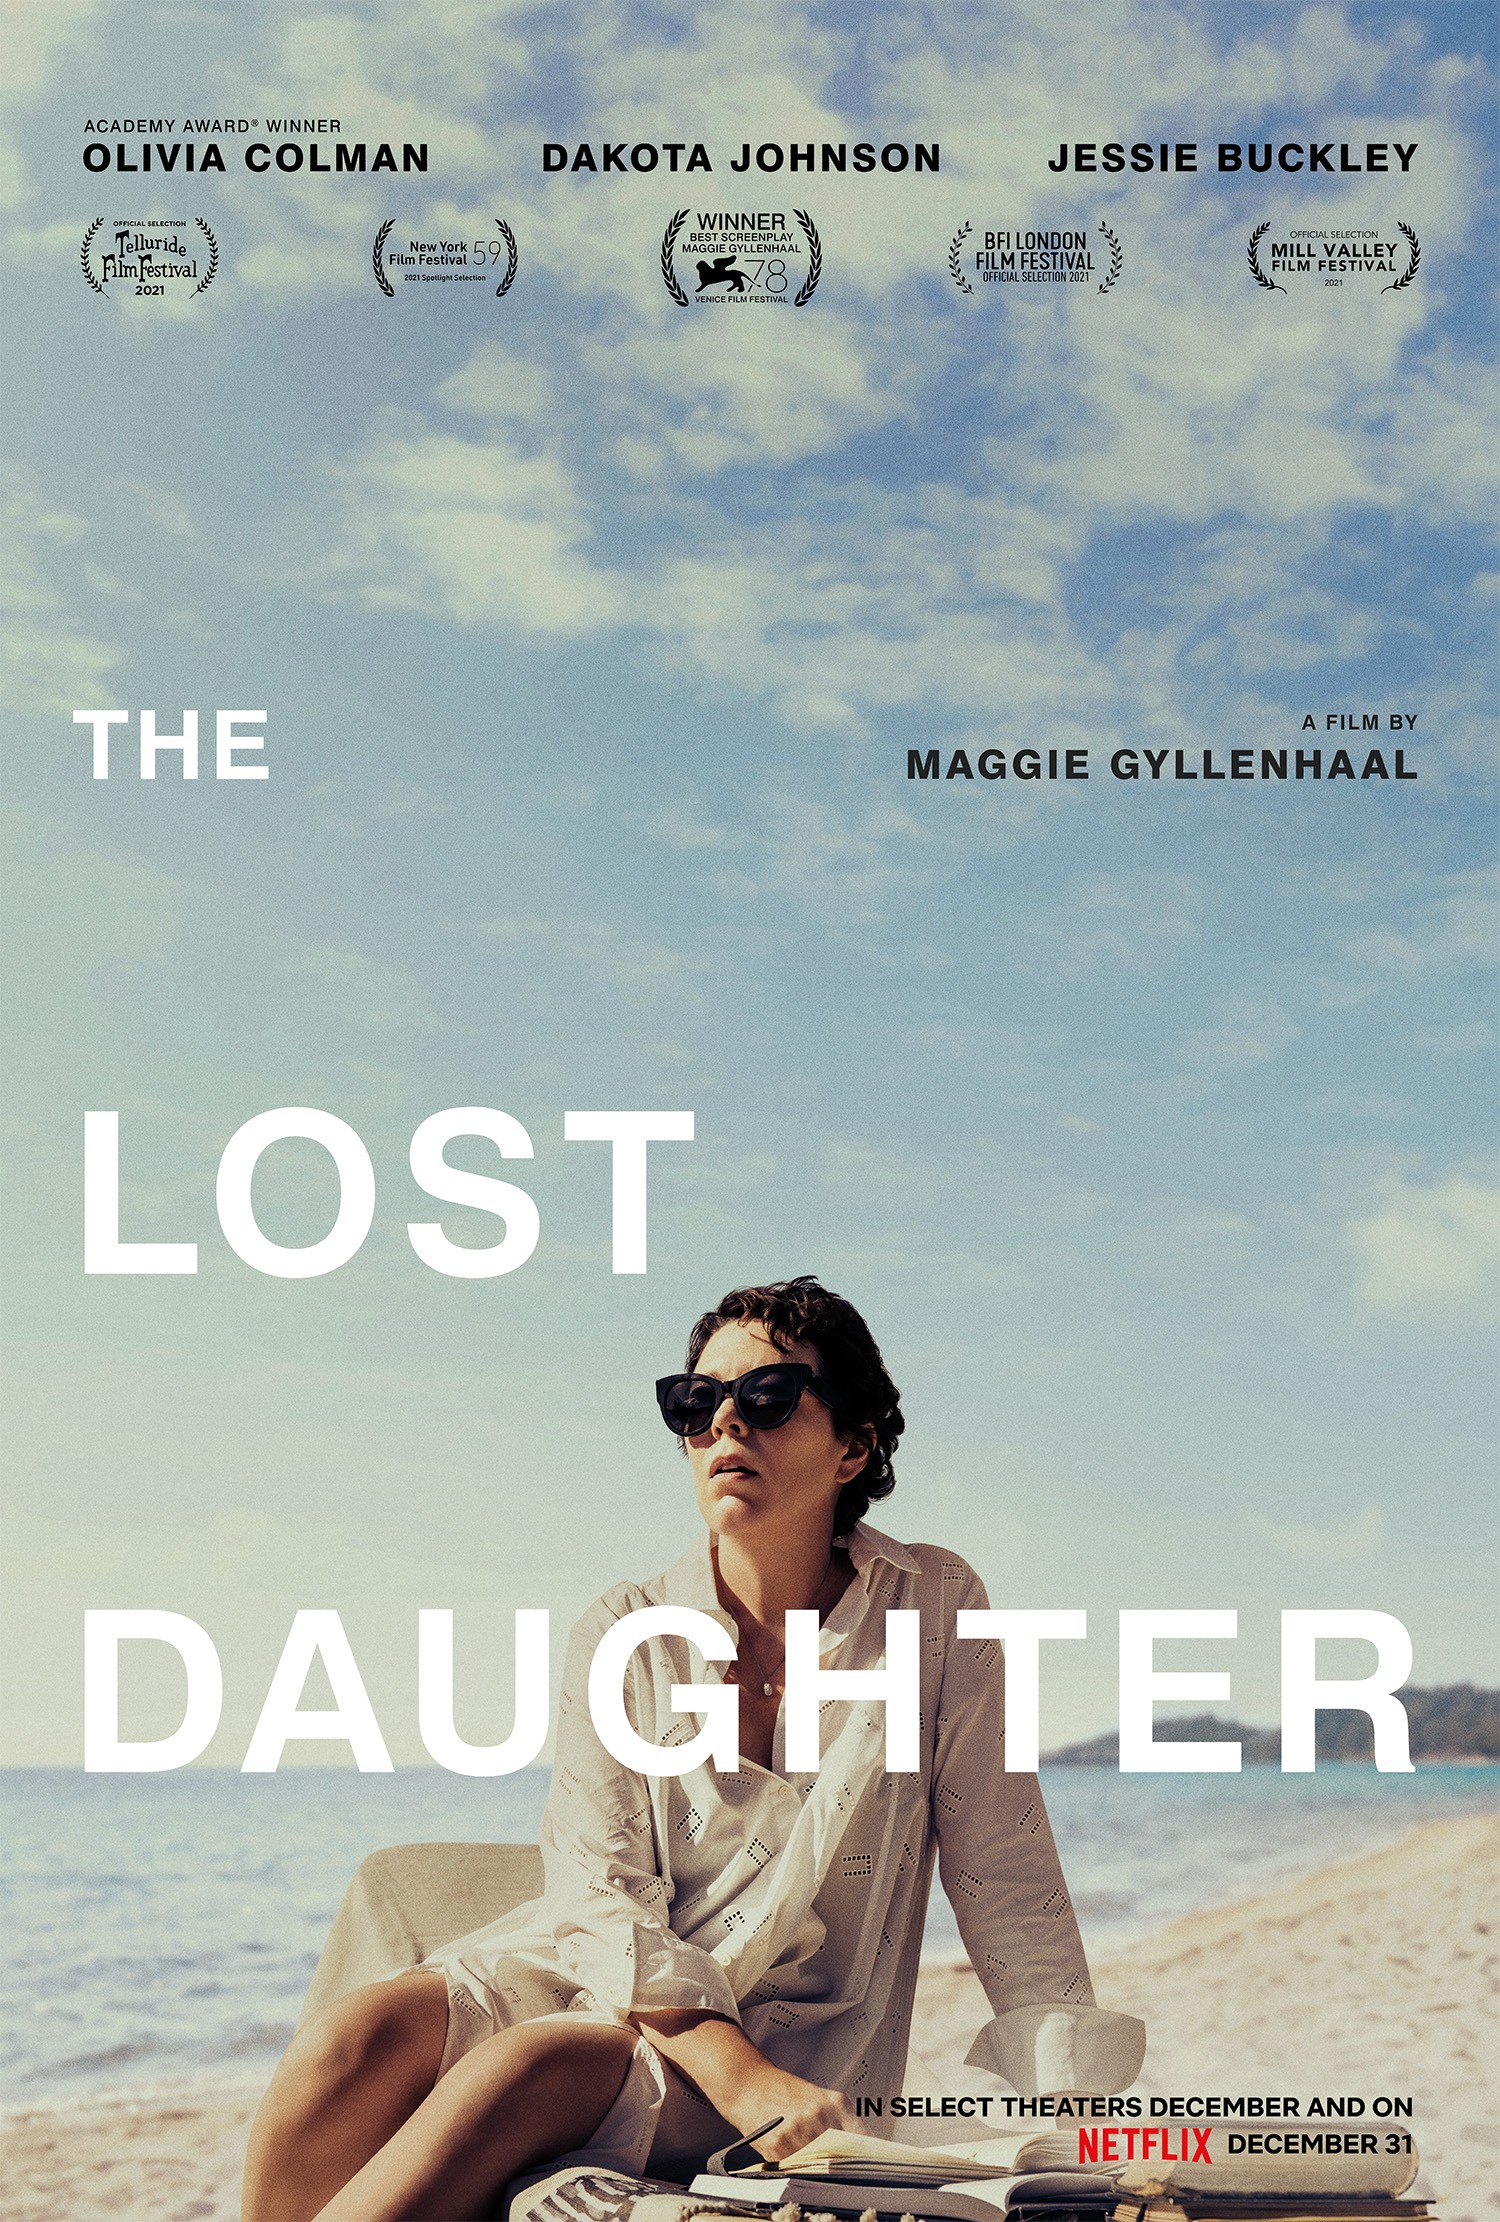 The Costumes in 'The Lost Daughter' Symbolize Maintaining (and